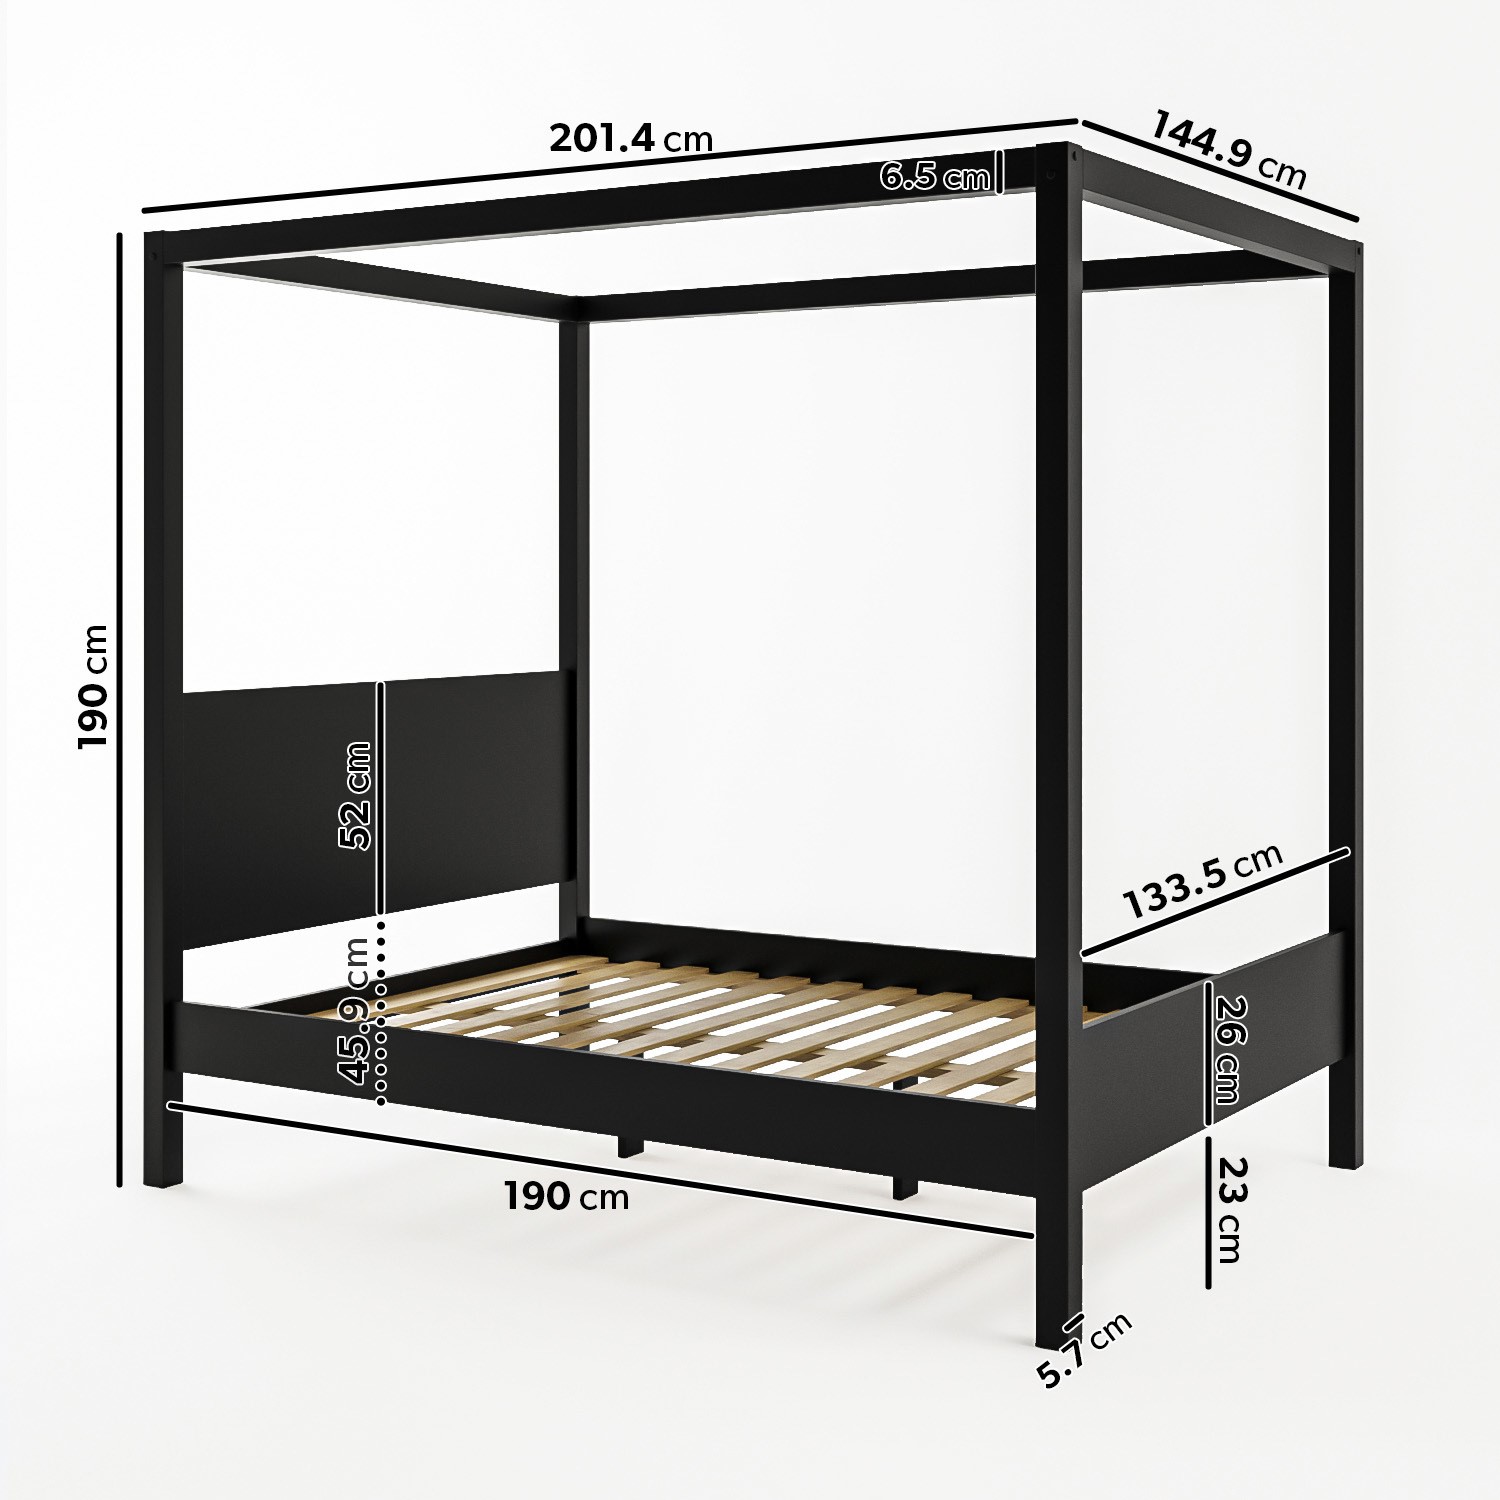 Read more about Double four poster bed frame in black victoria